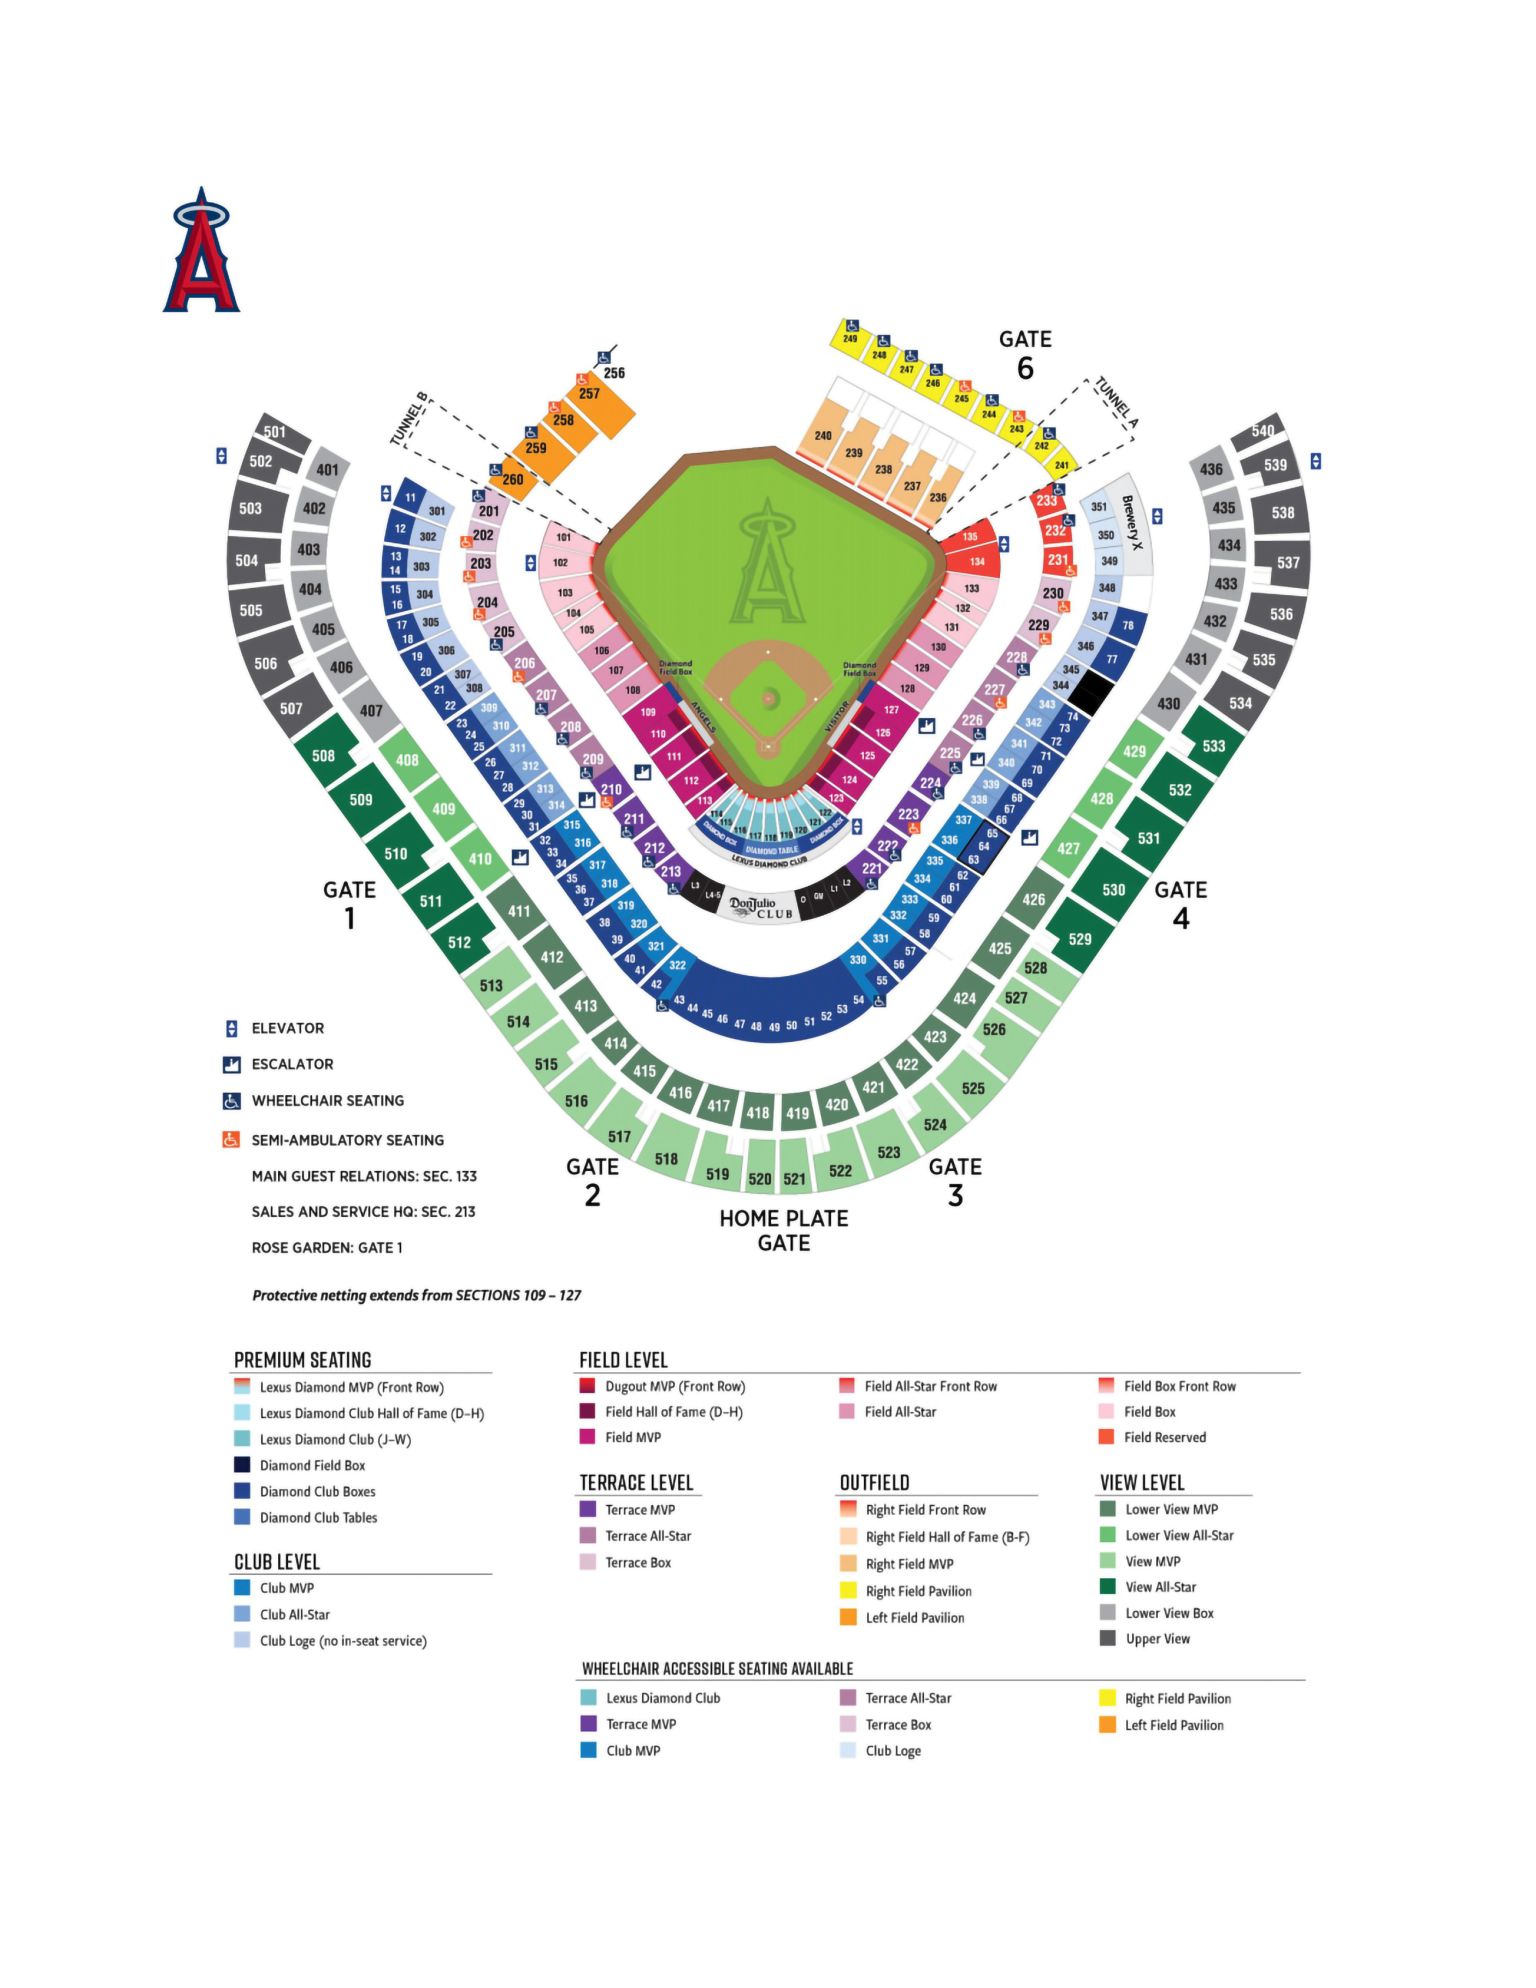 Royals launch 3D seating chart, by MLB.com/blogs